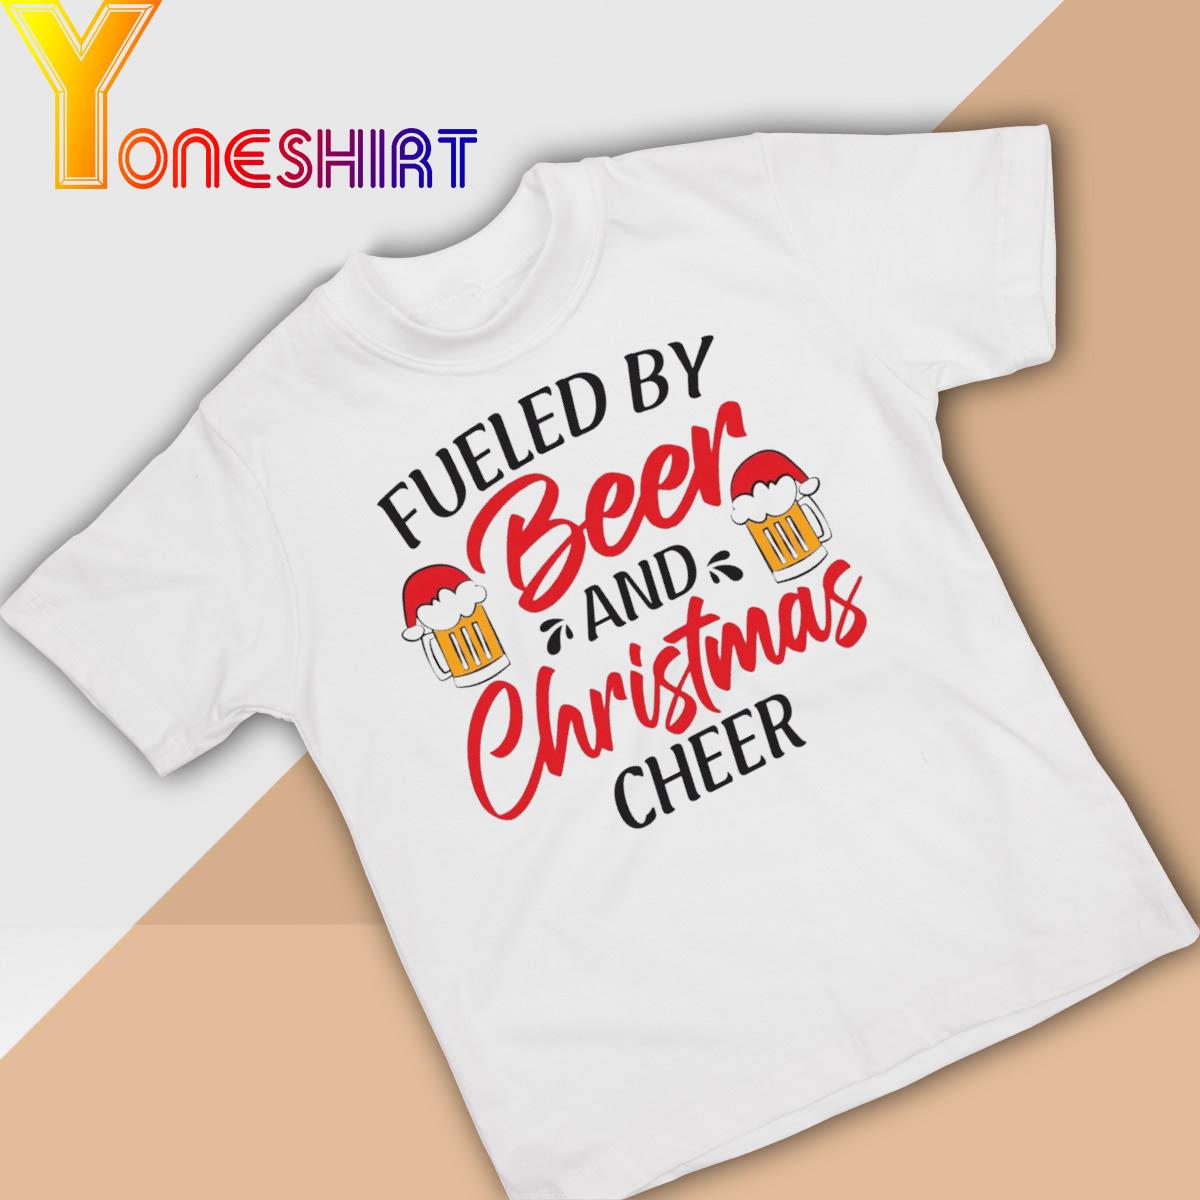 Fueled by Beer and Christmas Cheer Shirt